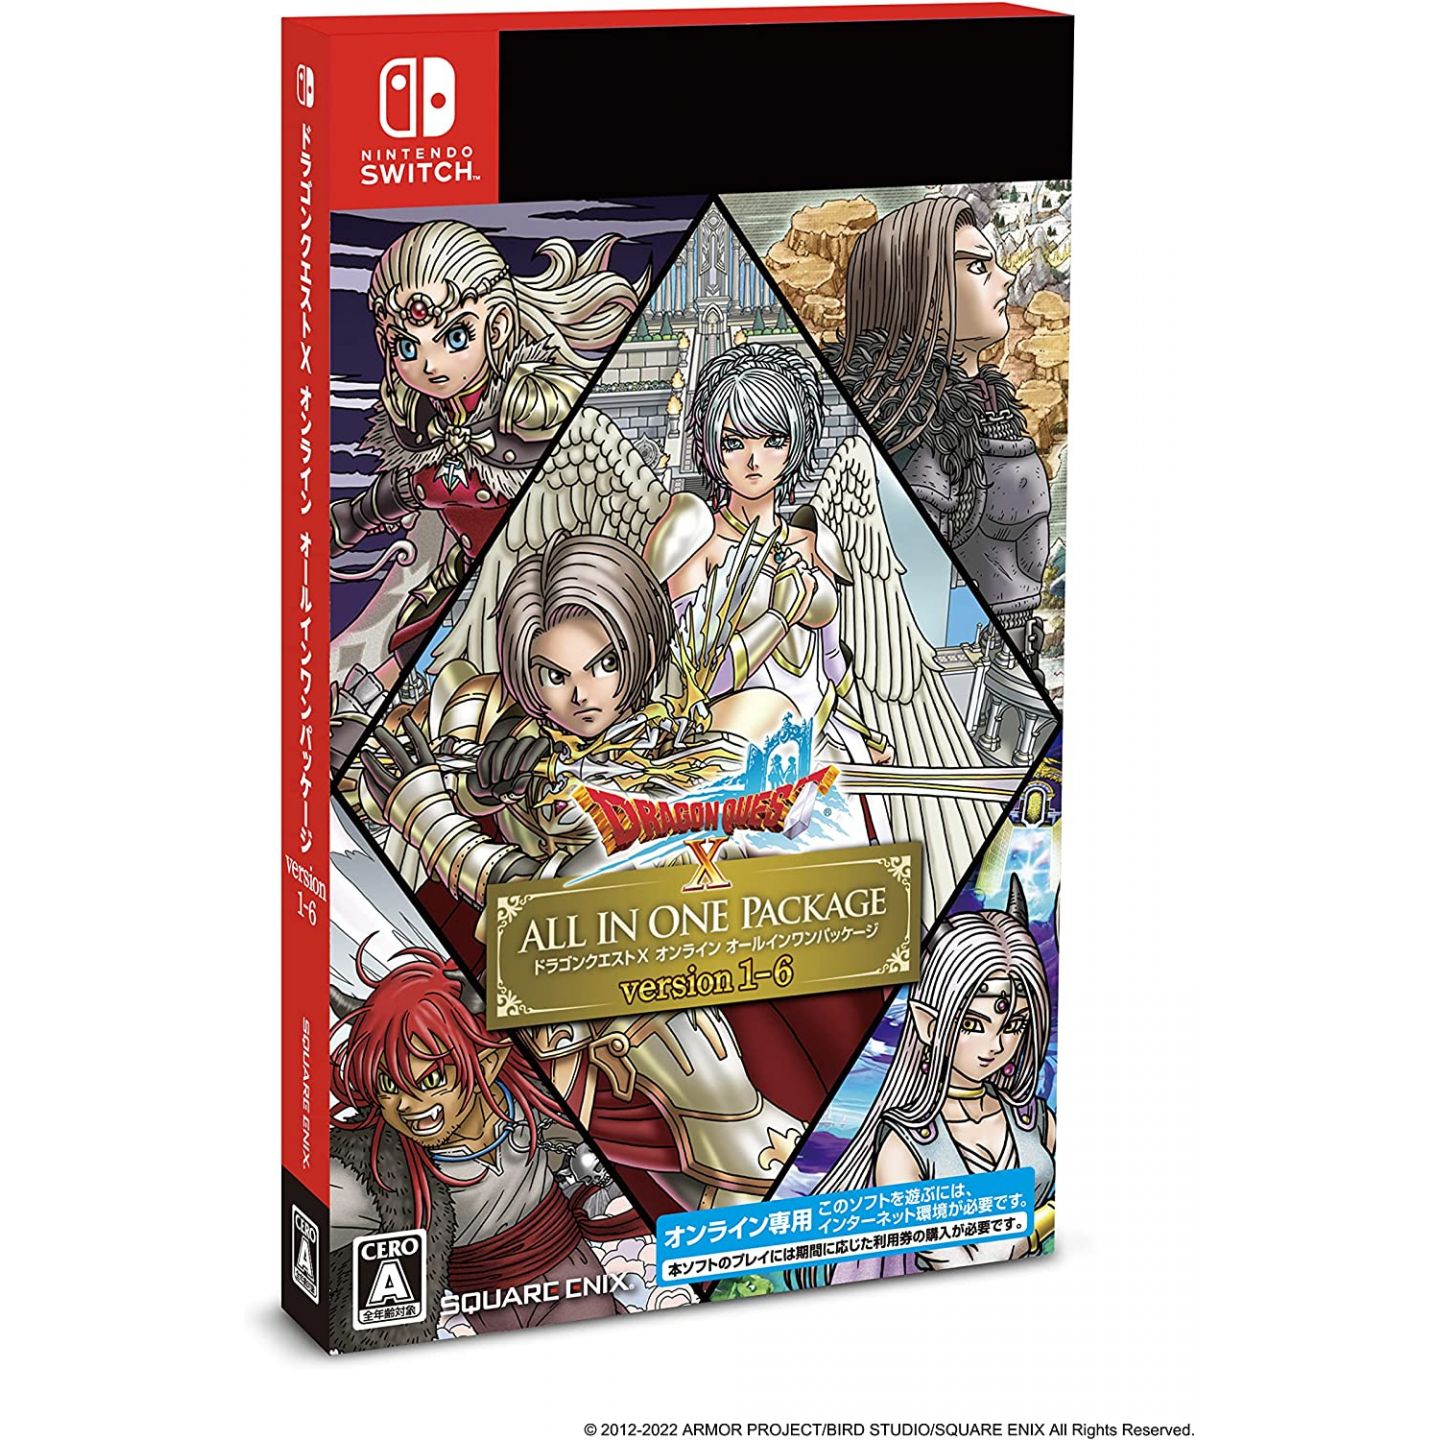 Square Enix Dragon Quest X Online All In One Package Version 1 6 For Nintendo Switch